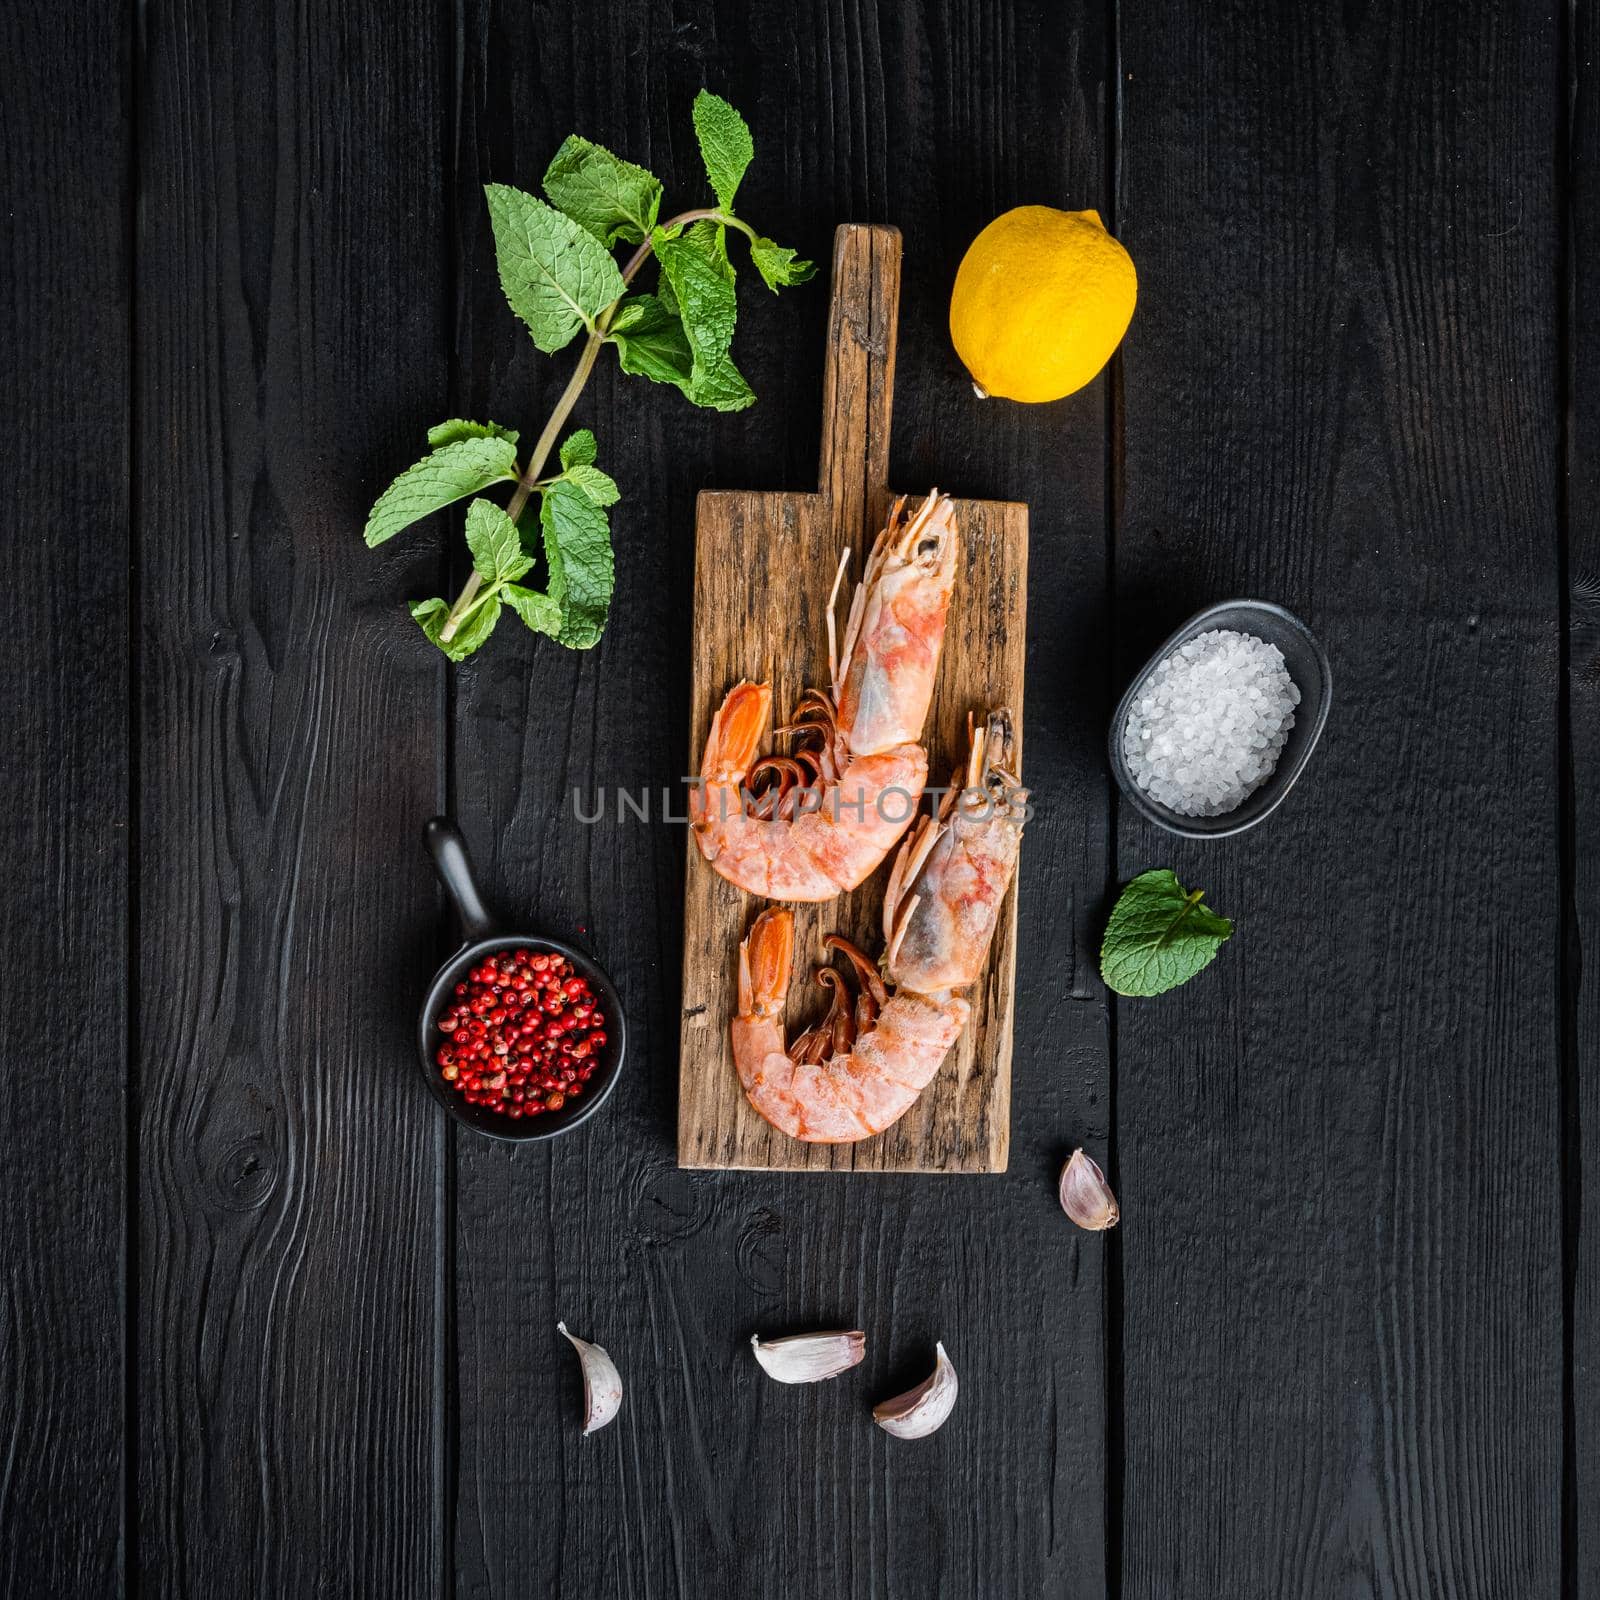 Seafood scampi on wooden board over black wood table, flat lay, food photo.